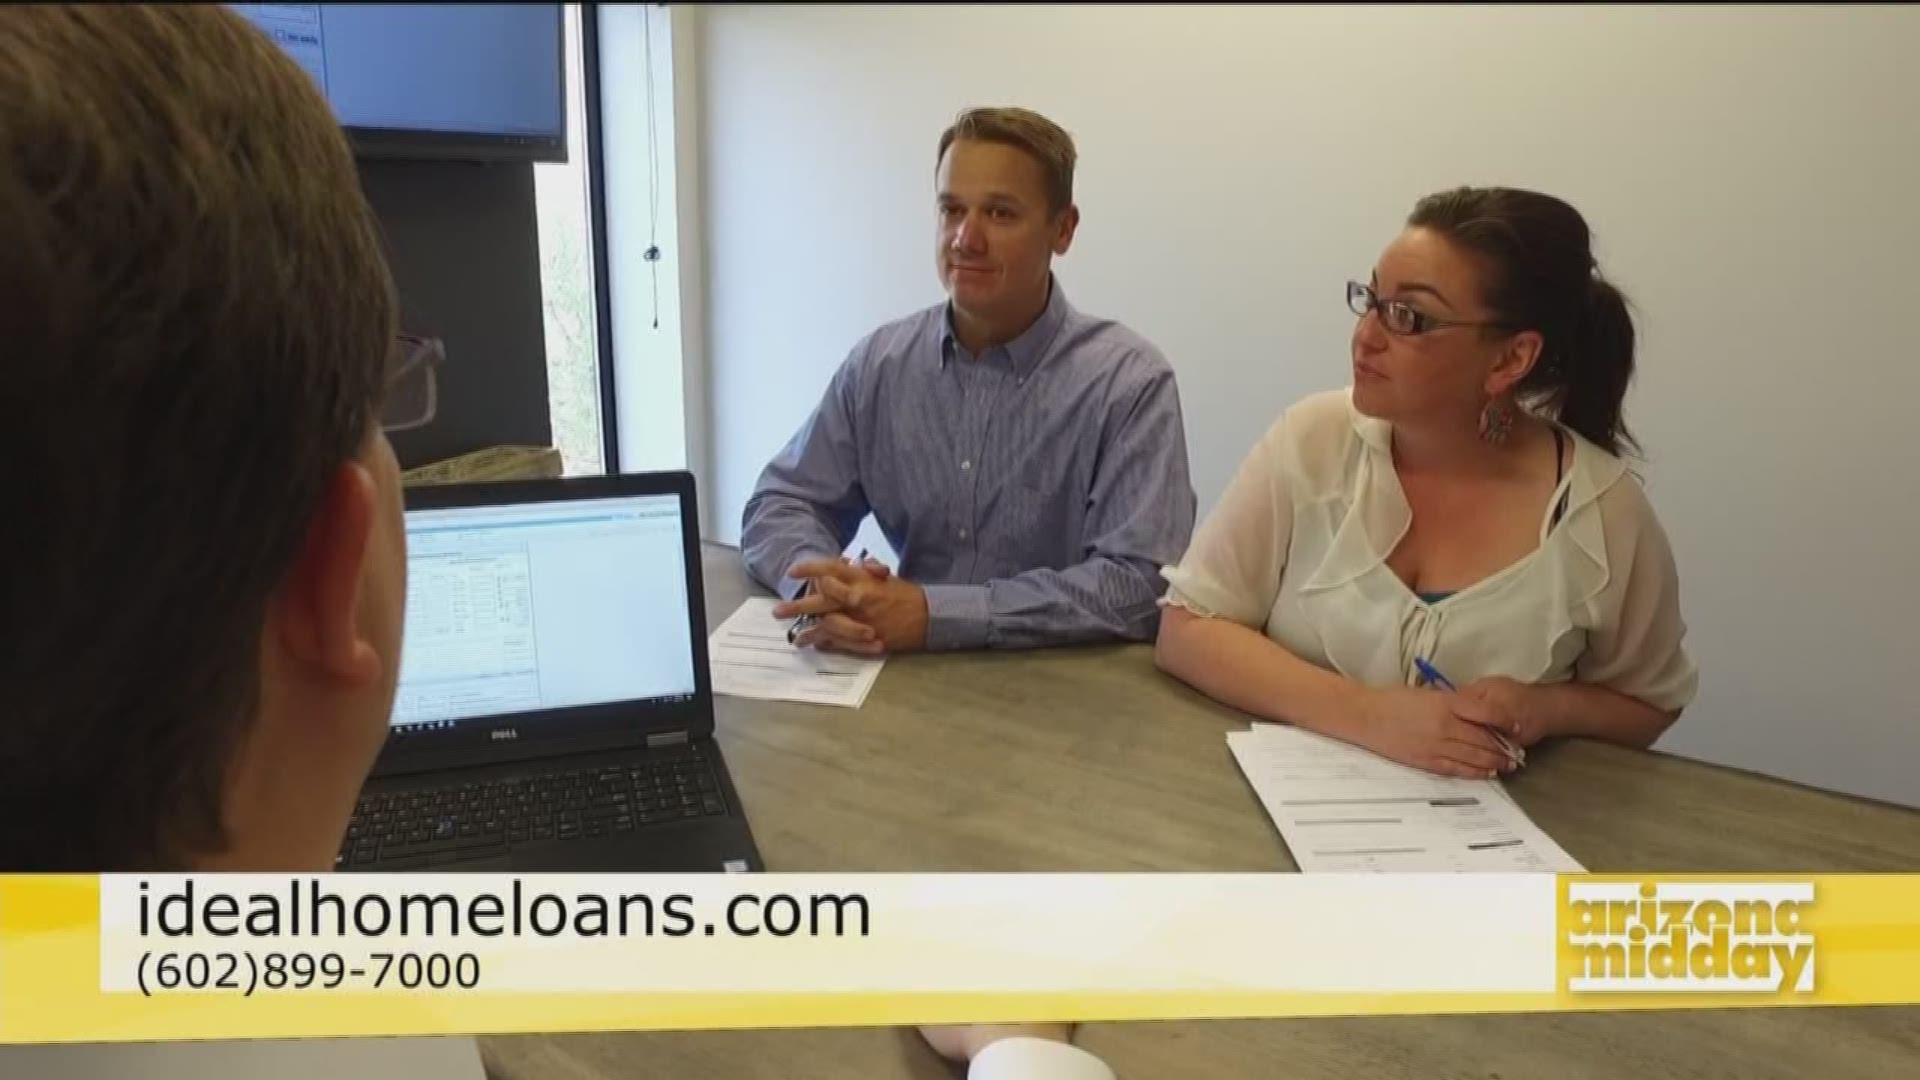 Lots of land and low interest rates are making Phoenix one of the hottest housing markets in the country, and Brent Ivinson from ideal Home Loans tells us how to take advantage of it.